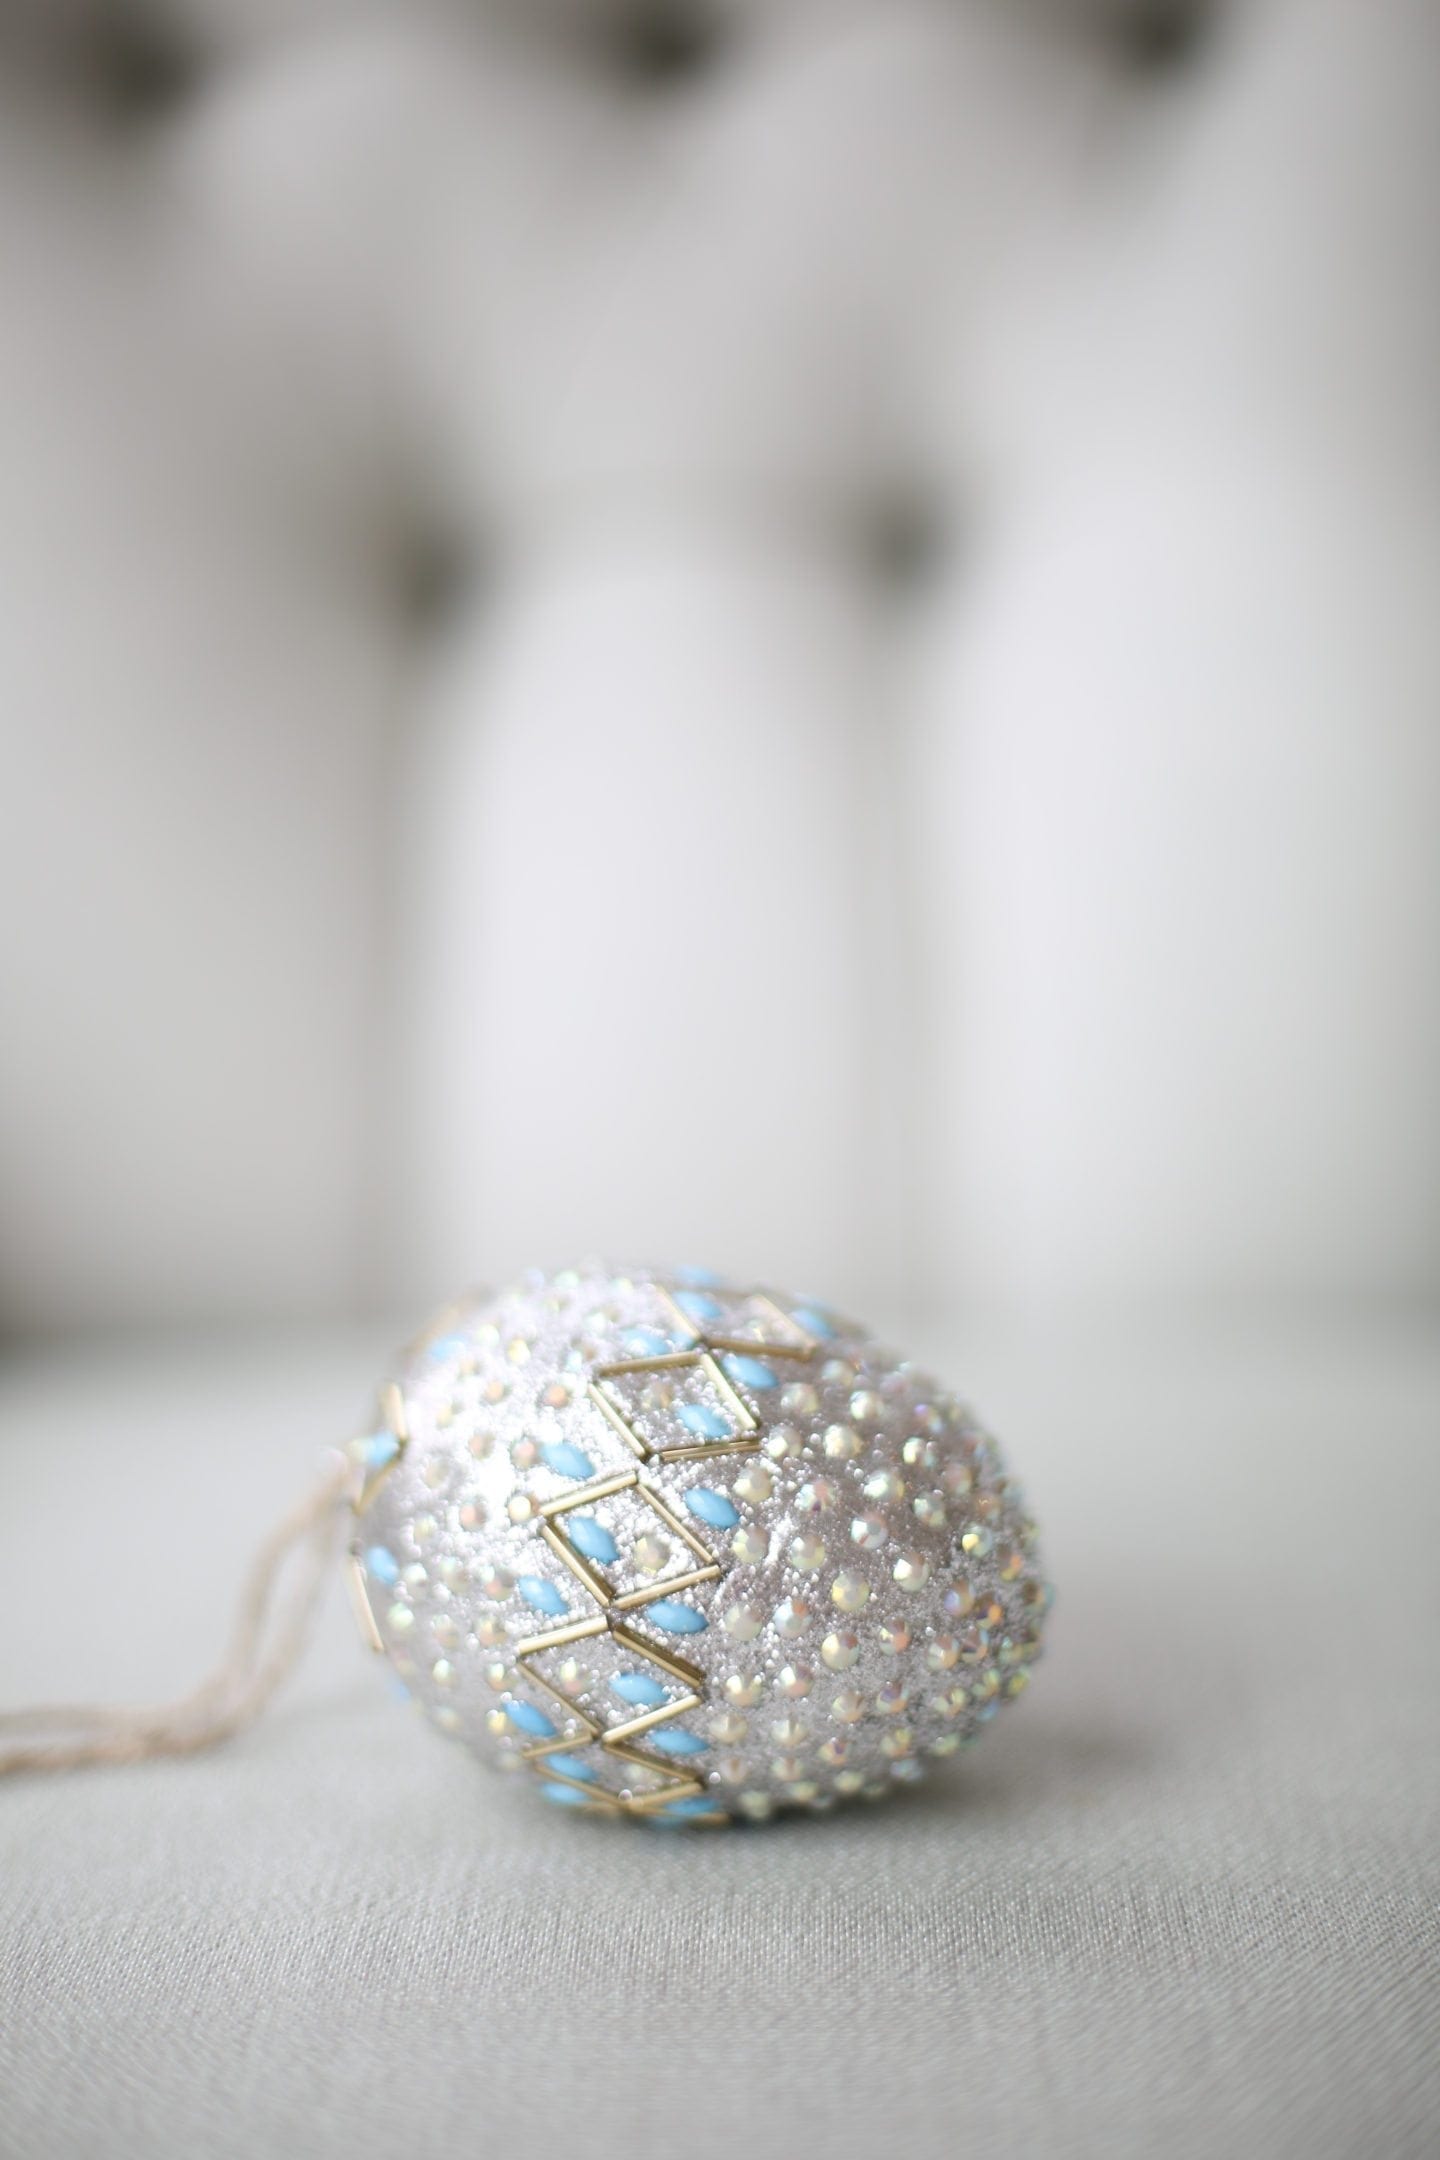 Blue and Silver Easter egg from Pottery Barn holiday decor line. 